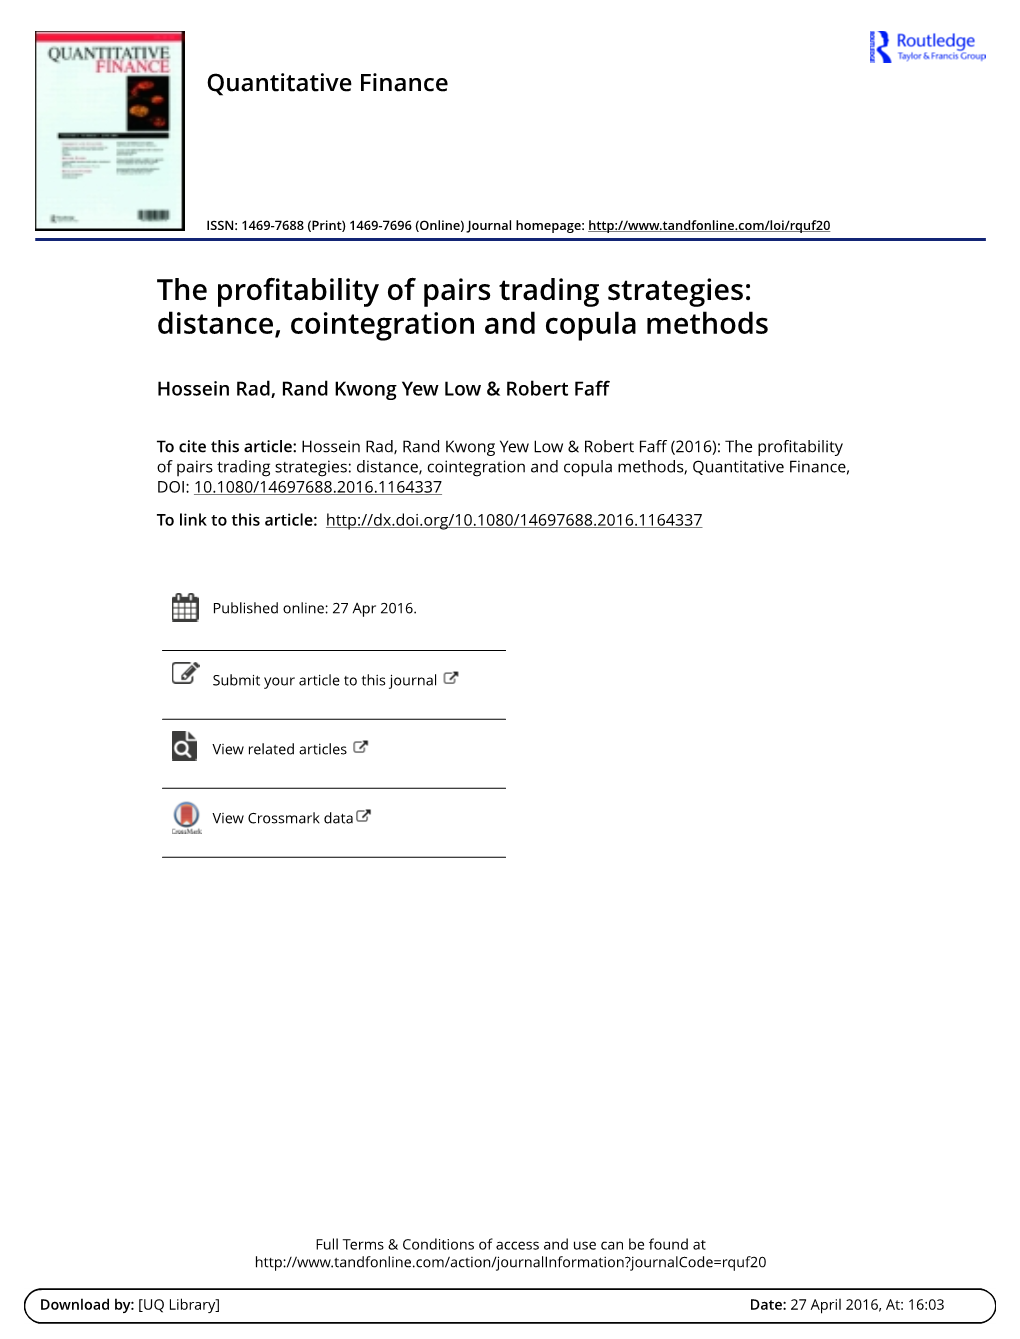 The Profitability of Pairs Trading Strategies: Distance, Cointegration and Copula Methods